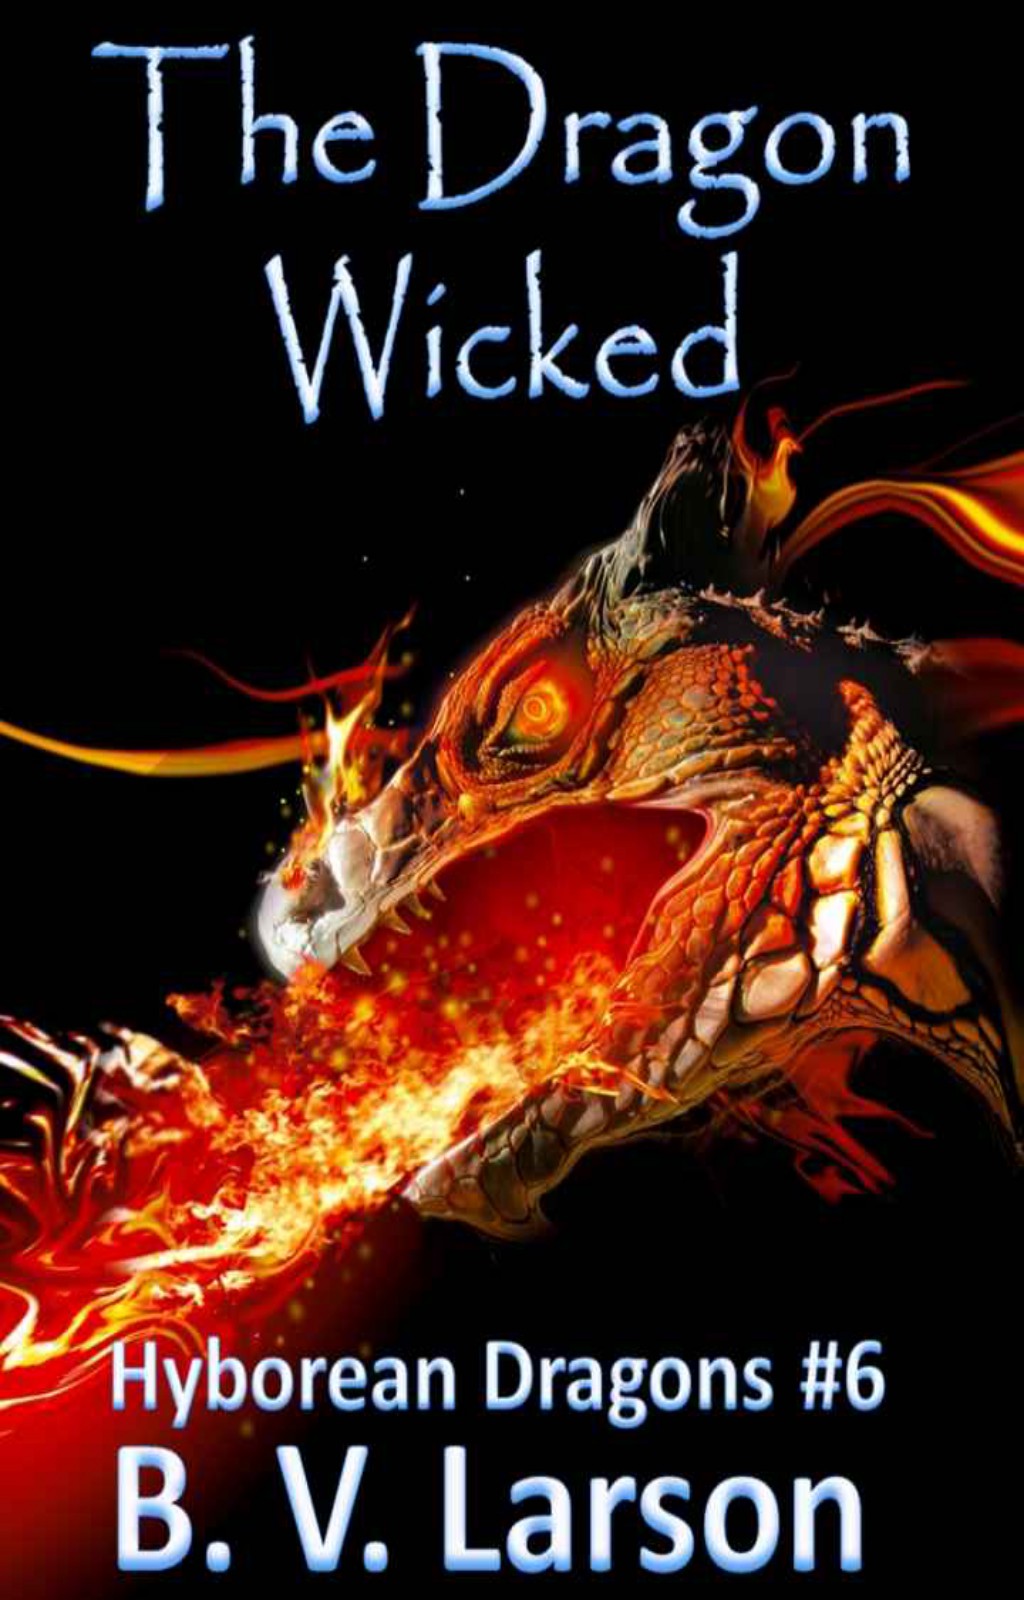 The Dragon Wicked by B. V. Larson